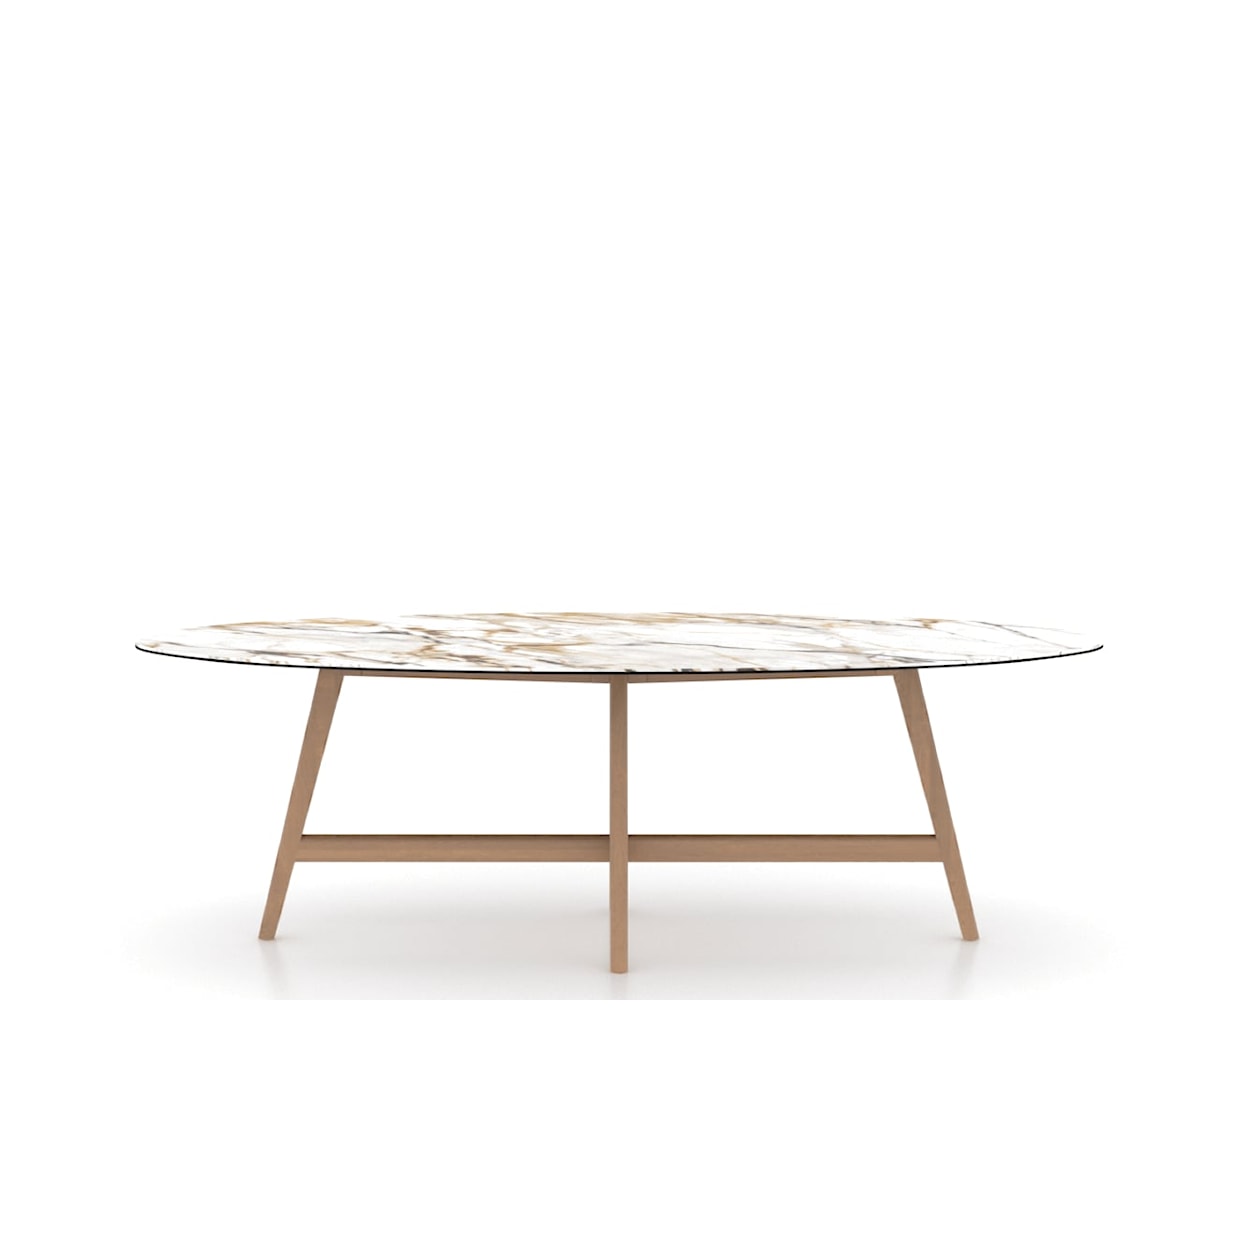 Canadel Downtown Downtown Porcelain Dining Table